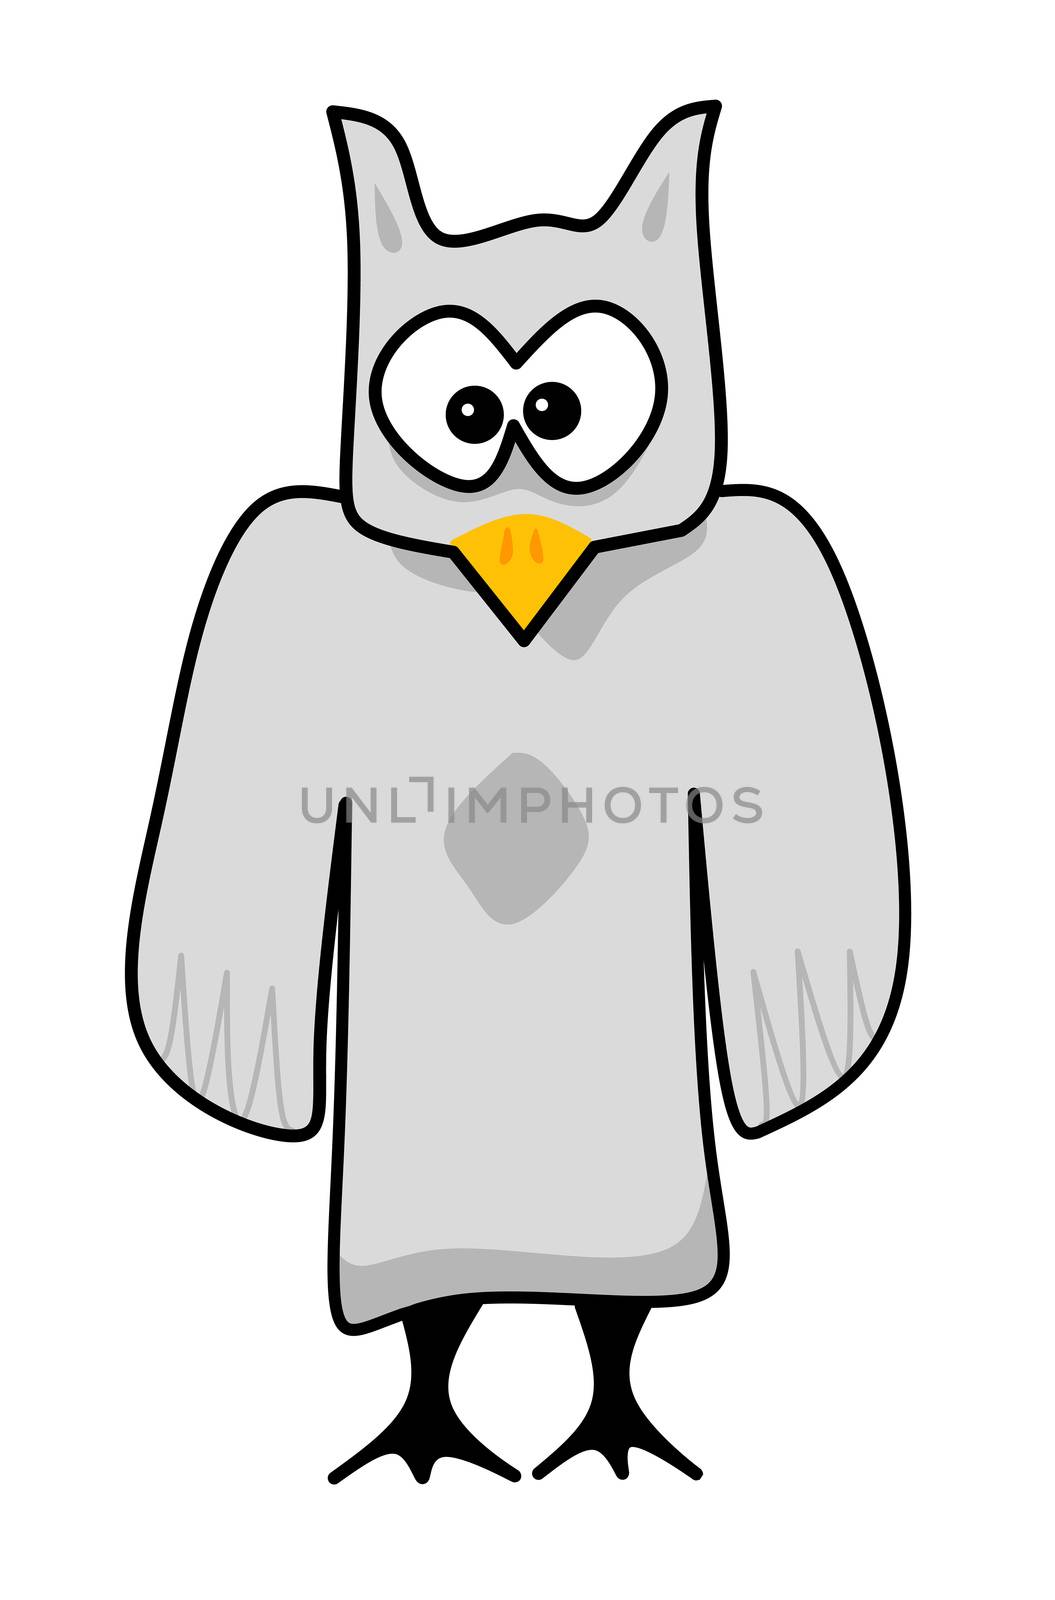 An illustration of a comic character gray watching owl